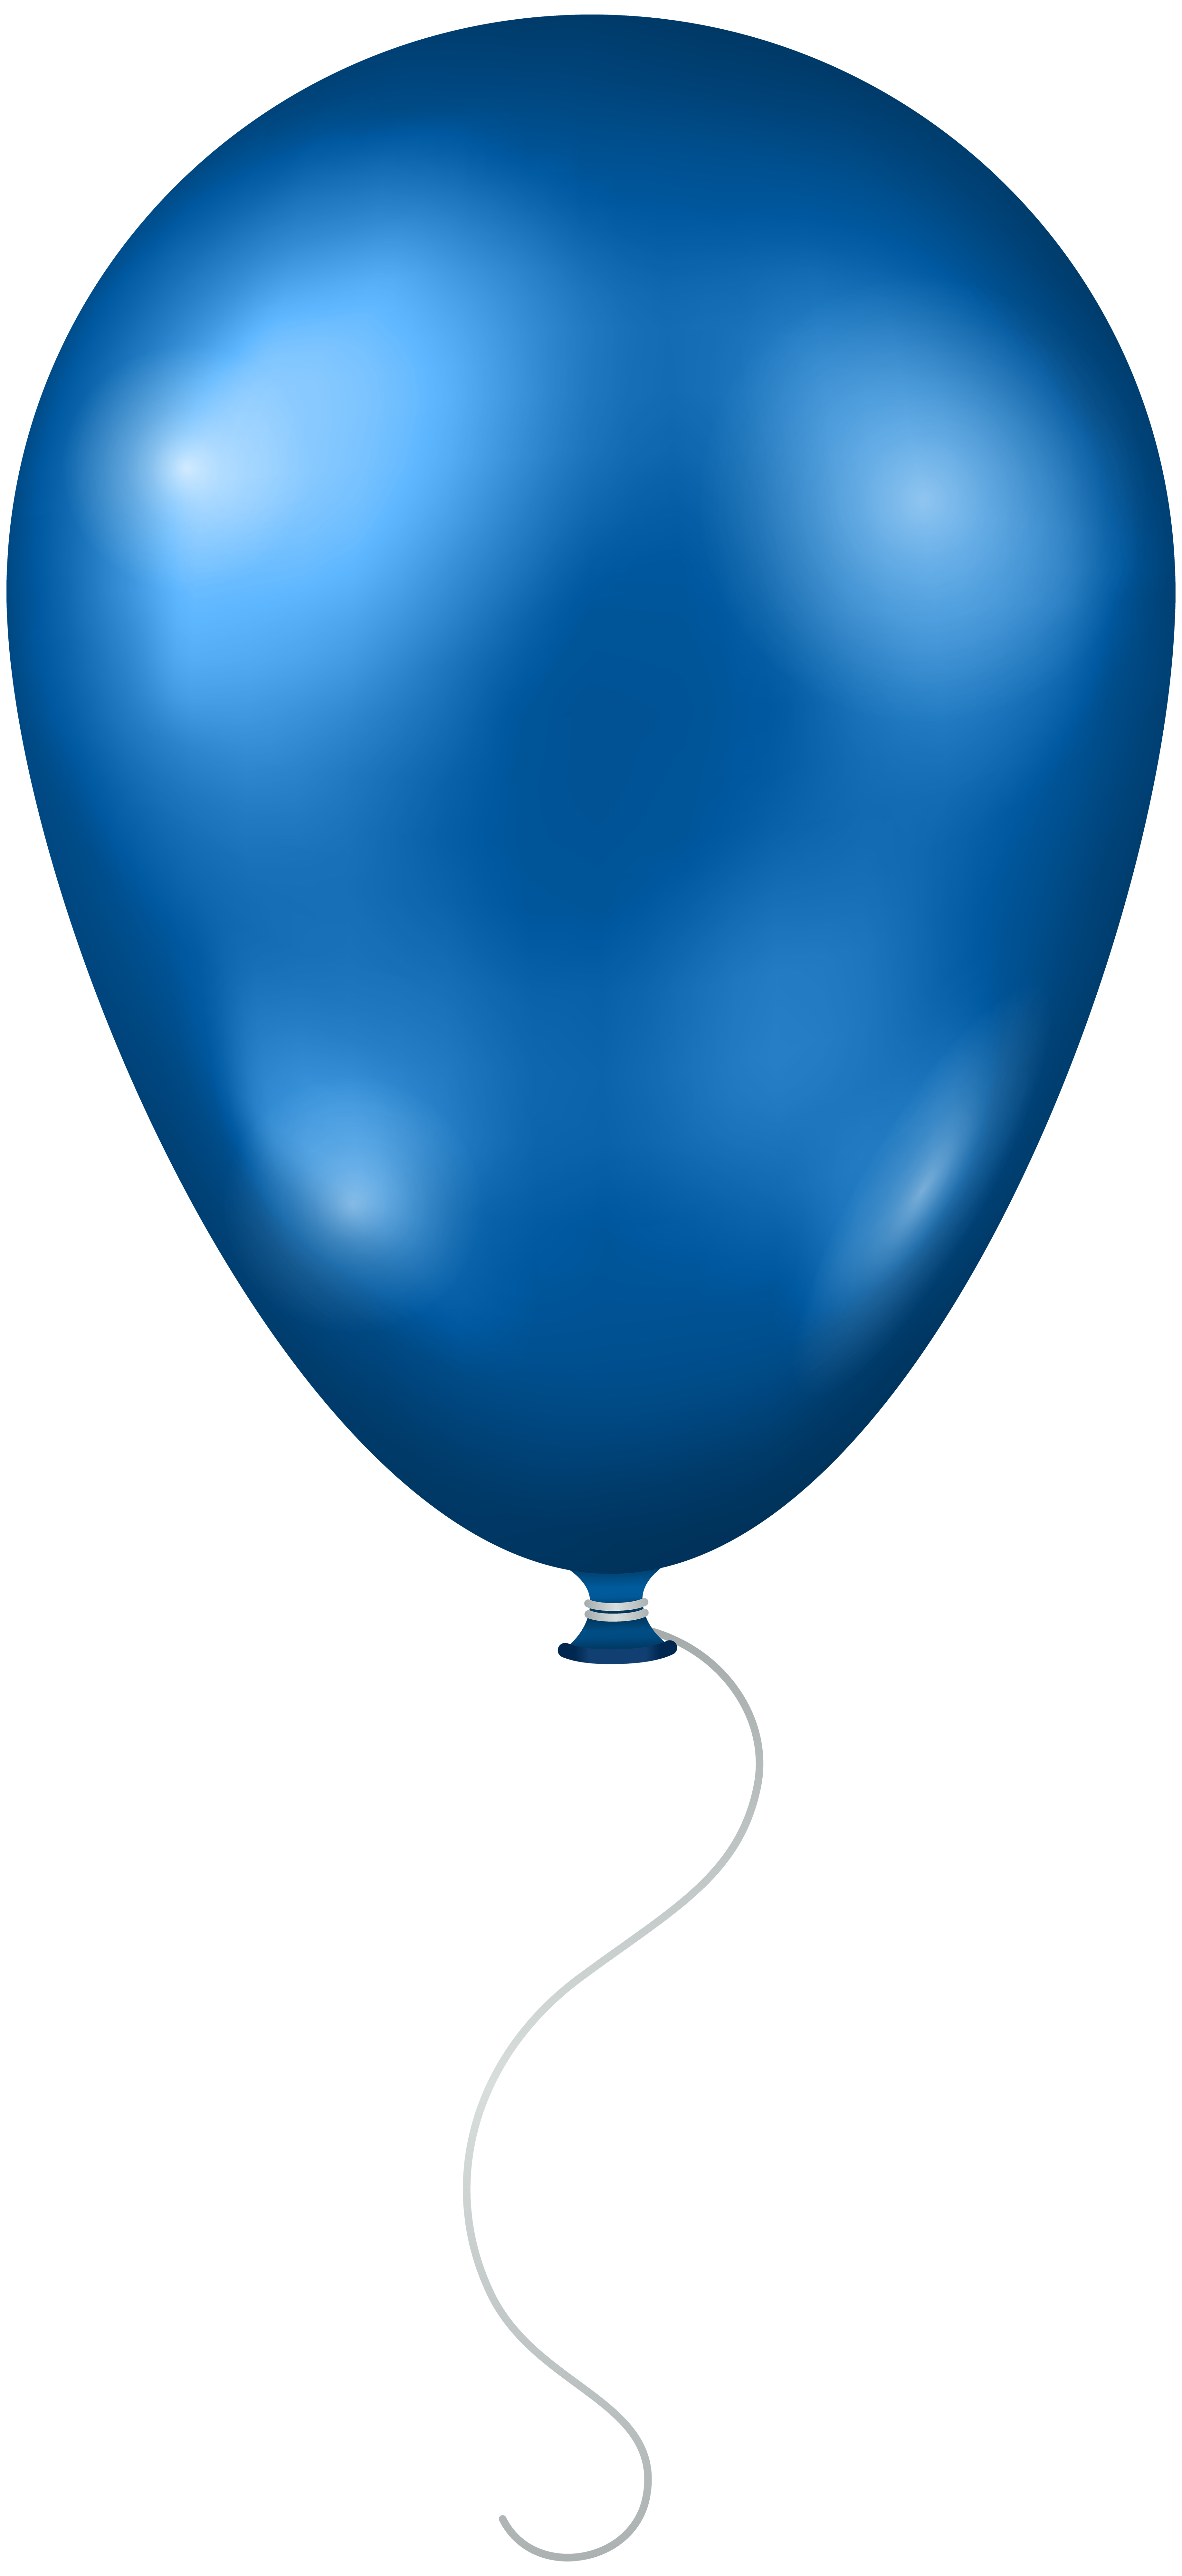 Blue Balloon Transparent Png Clip Art Image Gallery Yopriceville High Quality Images And Transparent Png Free Clipart